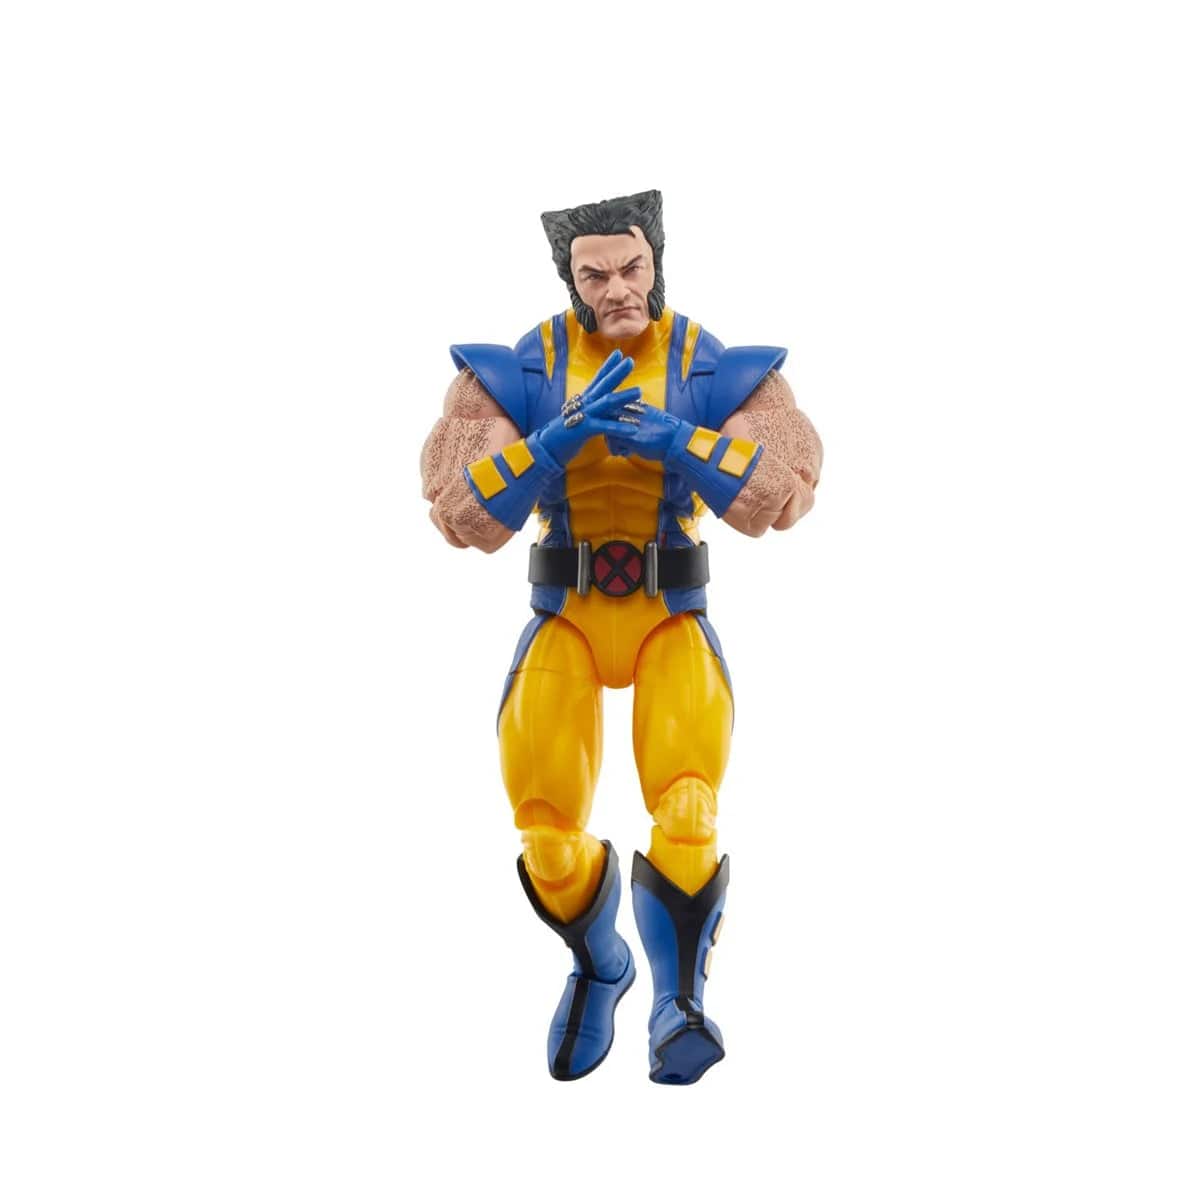  Analyzing image     X-Men-Marvel-Legends-Series-Wolverine-85th-Anniversary-Comics-6-Inch-Action-Figure-costume-Unmasked-Walk